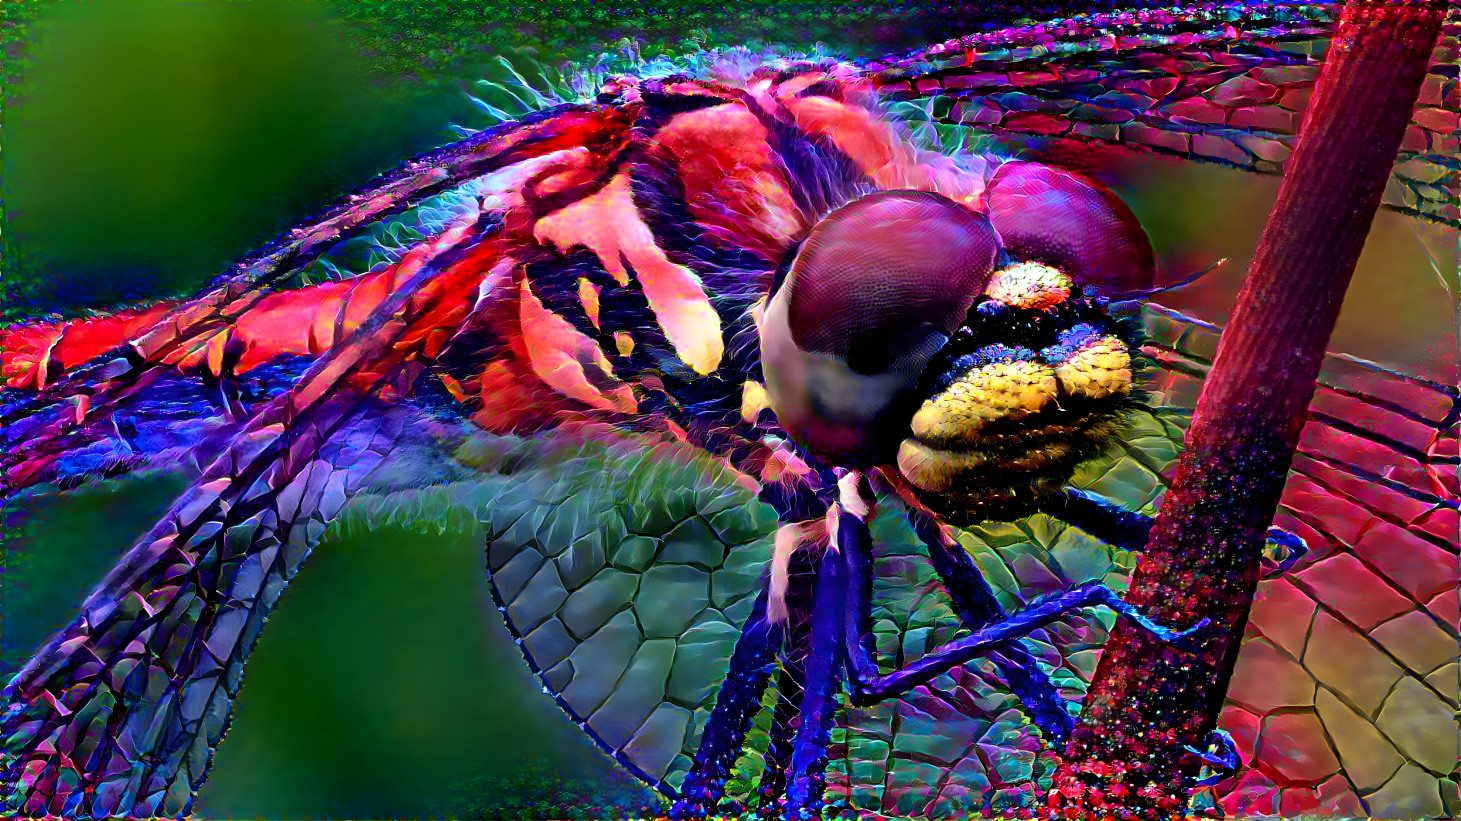 Dragonfly with abstract style #2